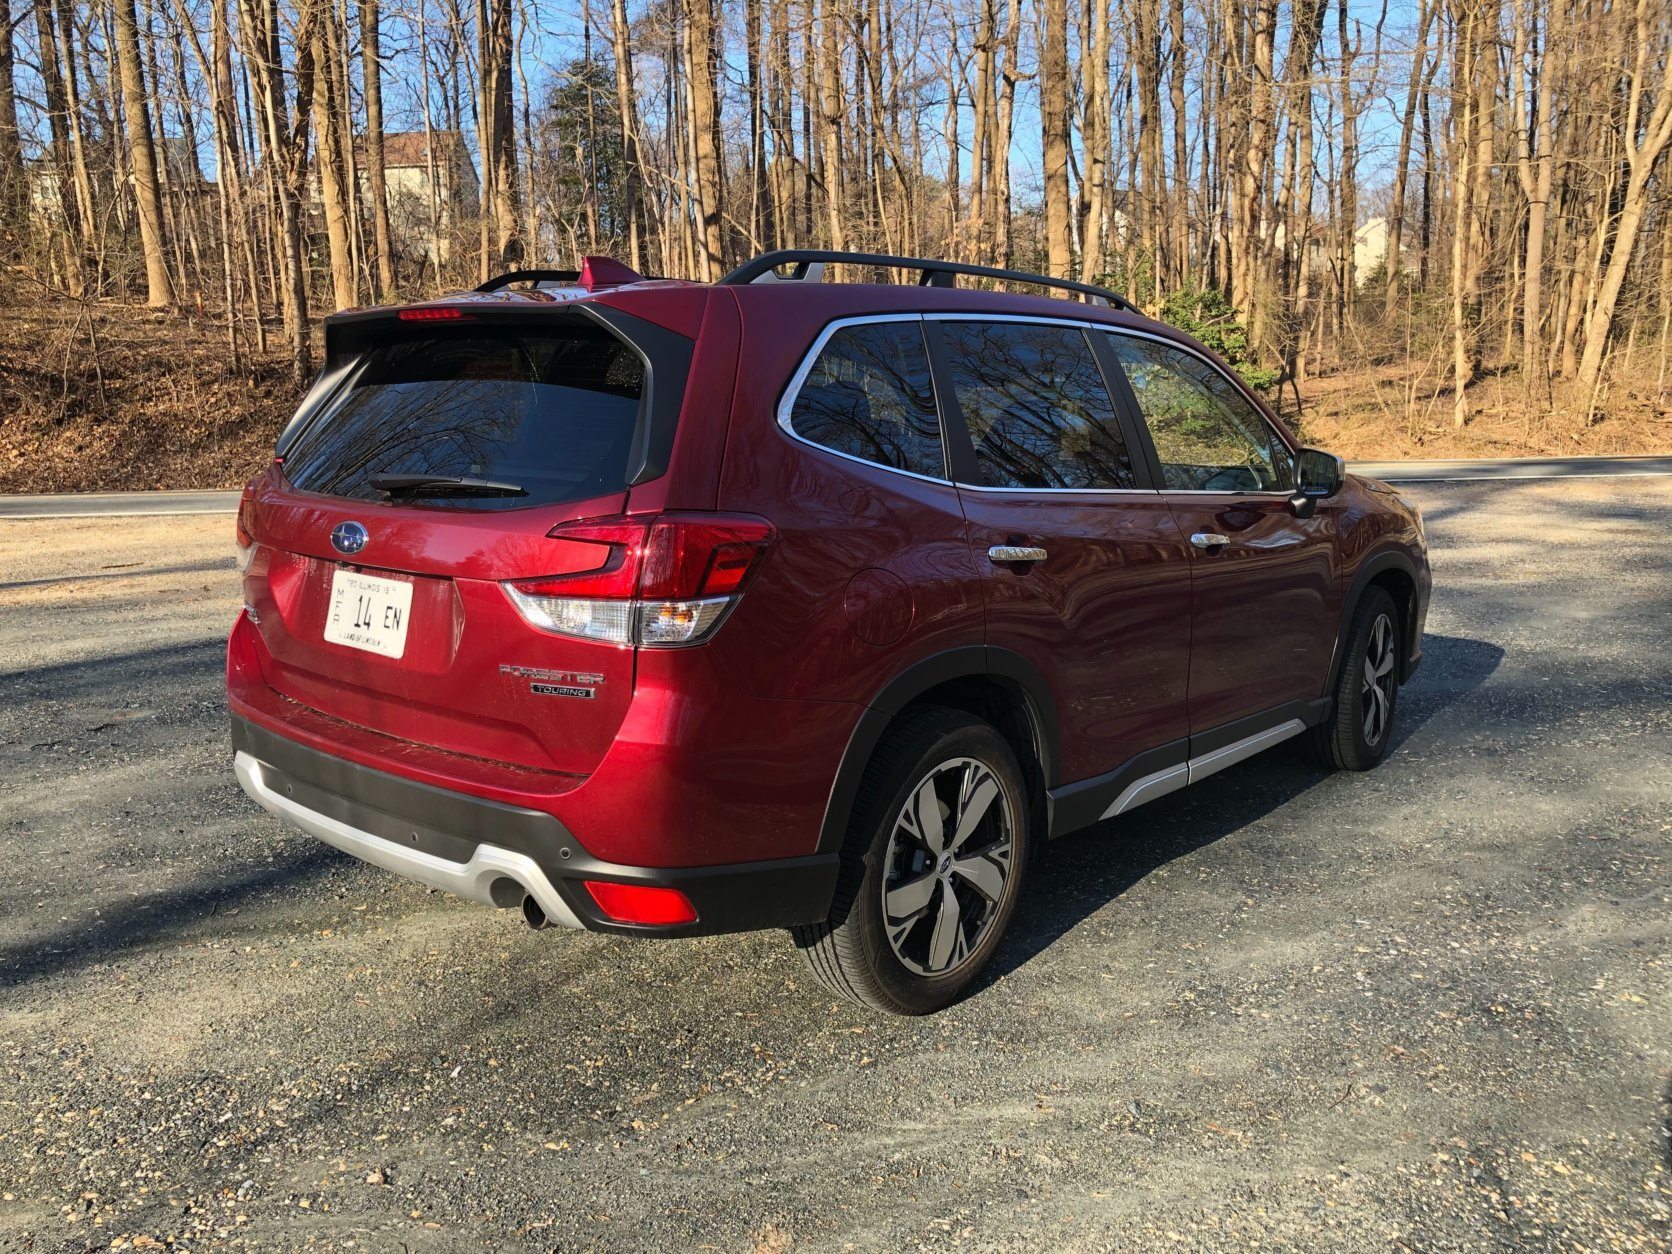 <p>What the new Subaru lacks is grunt from the 2.5L Boxer engine with 182hp. Around town with just me in the car, it seems OK with aggressive throttle response it’s pretty peppy. However, I wanted more power once I loaded up the seats and filled the cargo space for a trip.</p>
<p>The power rear lift gate is wider than before, allowing easier access.</p>
